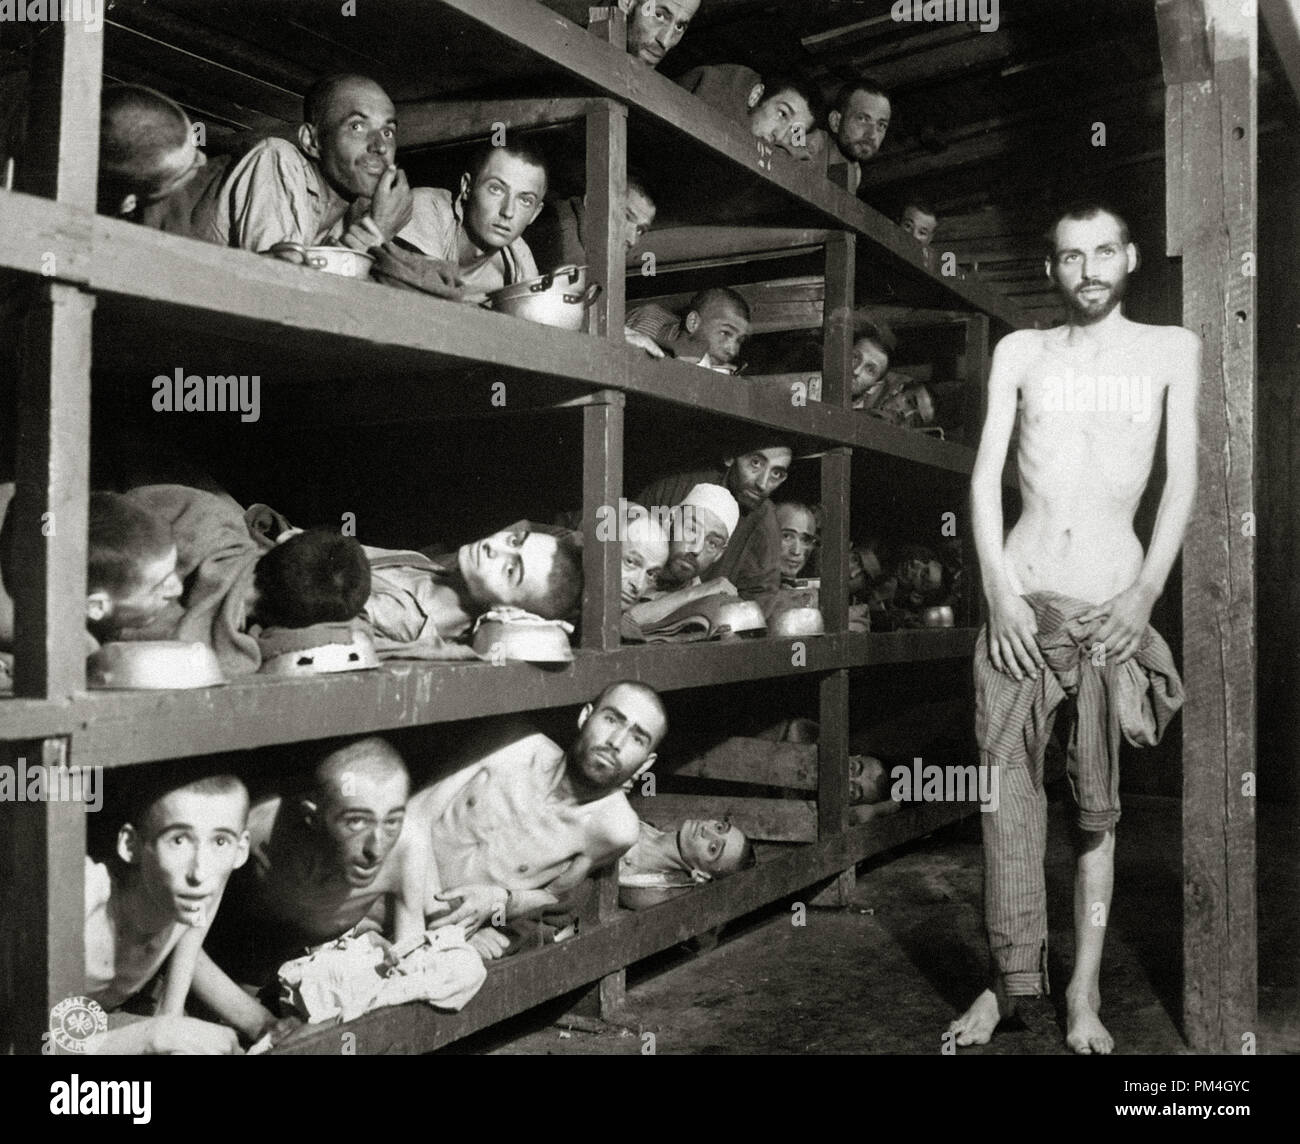 Slave laborers in the Buchenwald concentration camp near Jena; many had died from malnutrition when U.S. troops of the 80th Division entered the camp. Germany, April 16, 1945. Photo: Pvt. H. Miller. (Army)  File Reference # 1003 147THA Stock Photo